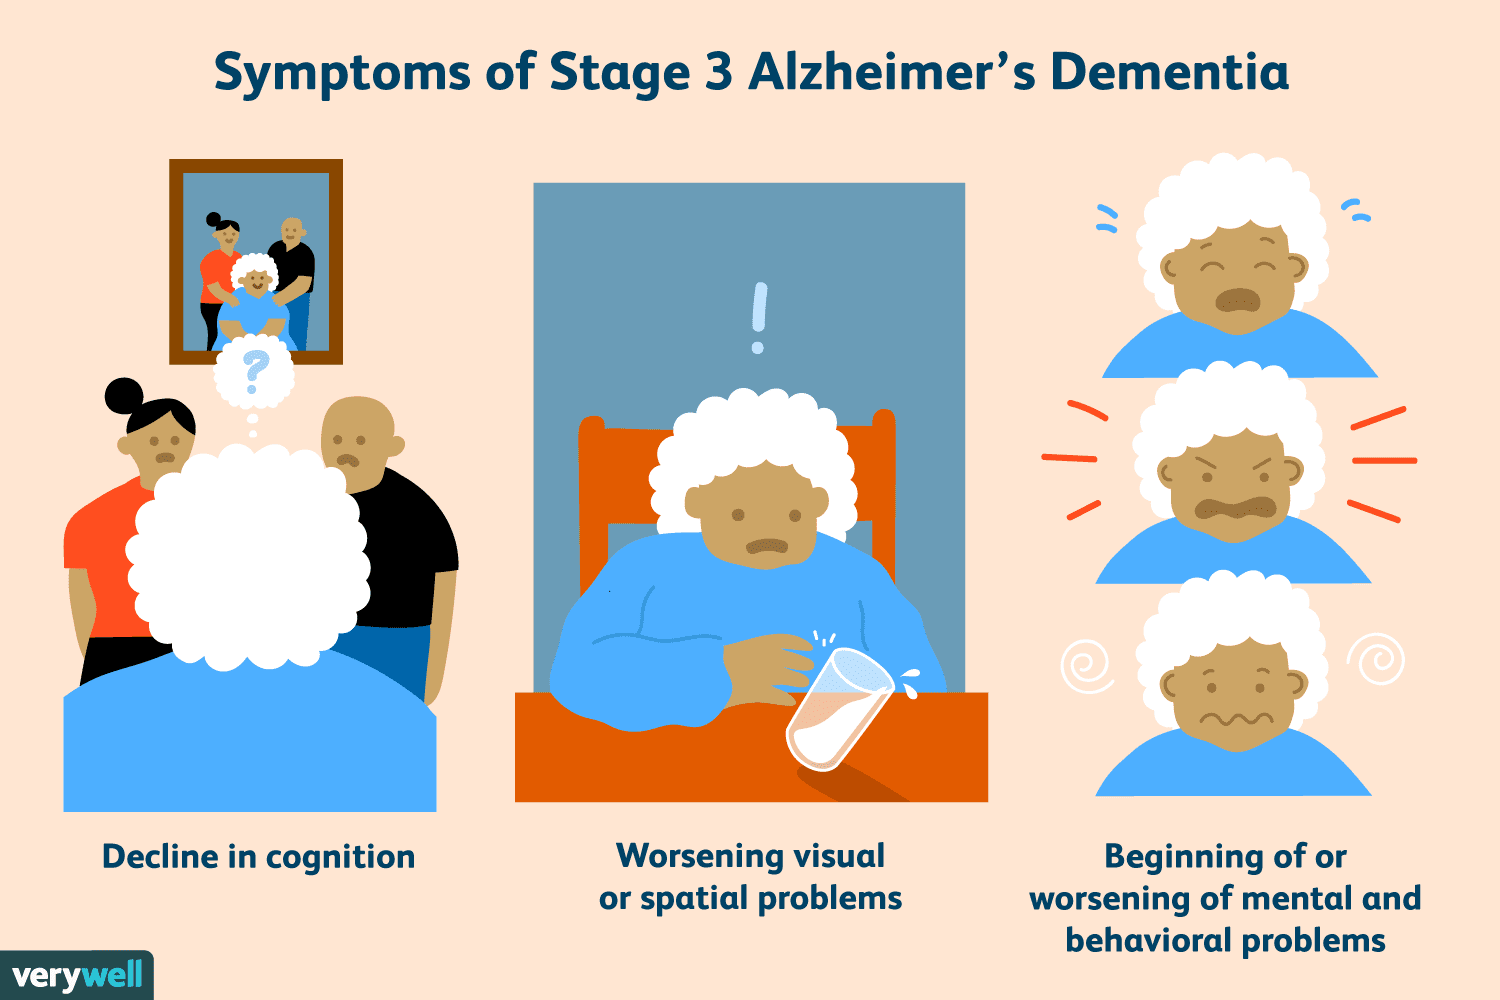 What Are the Stages of Alzheimers Dementia?